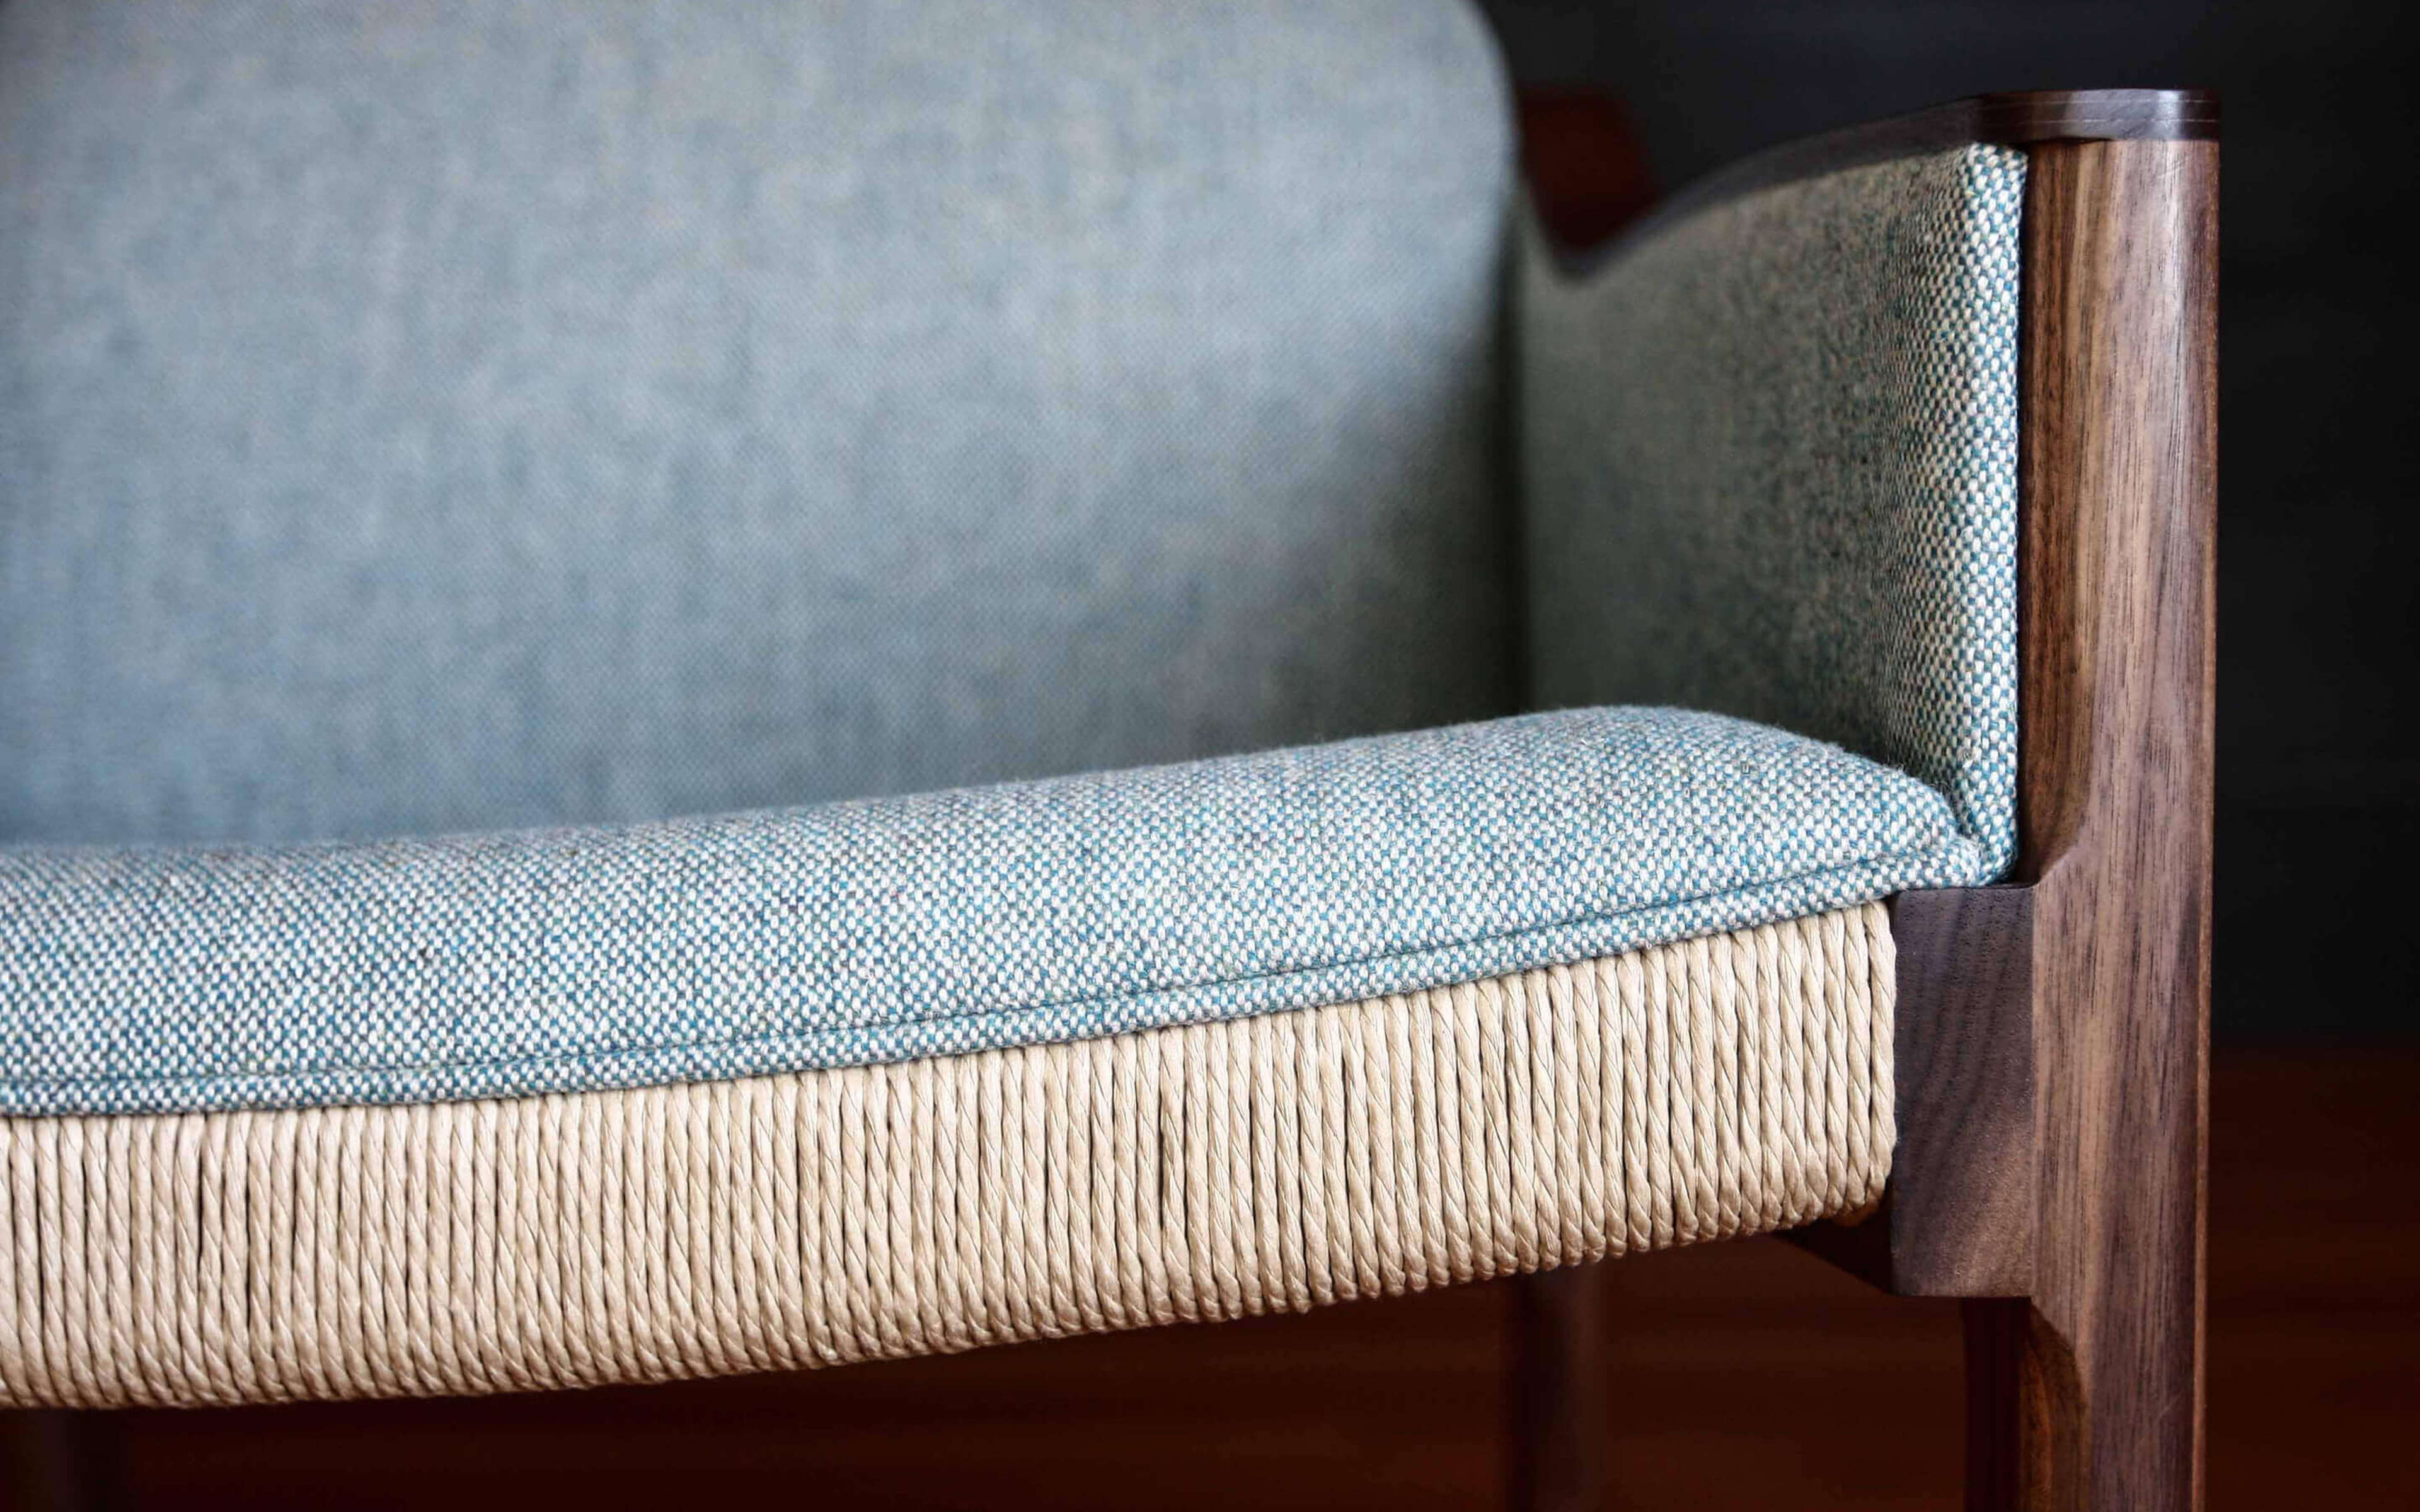 Camira chats with MorningWorks, a Californian design + make studio